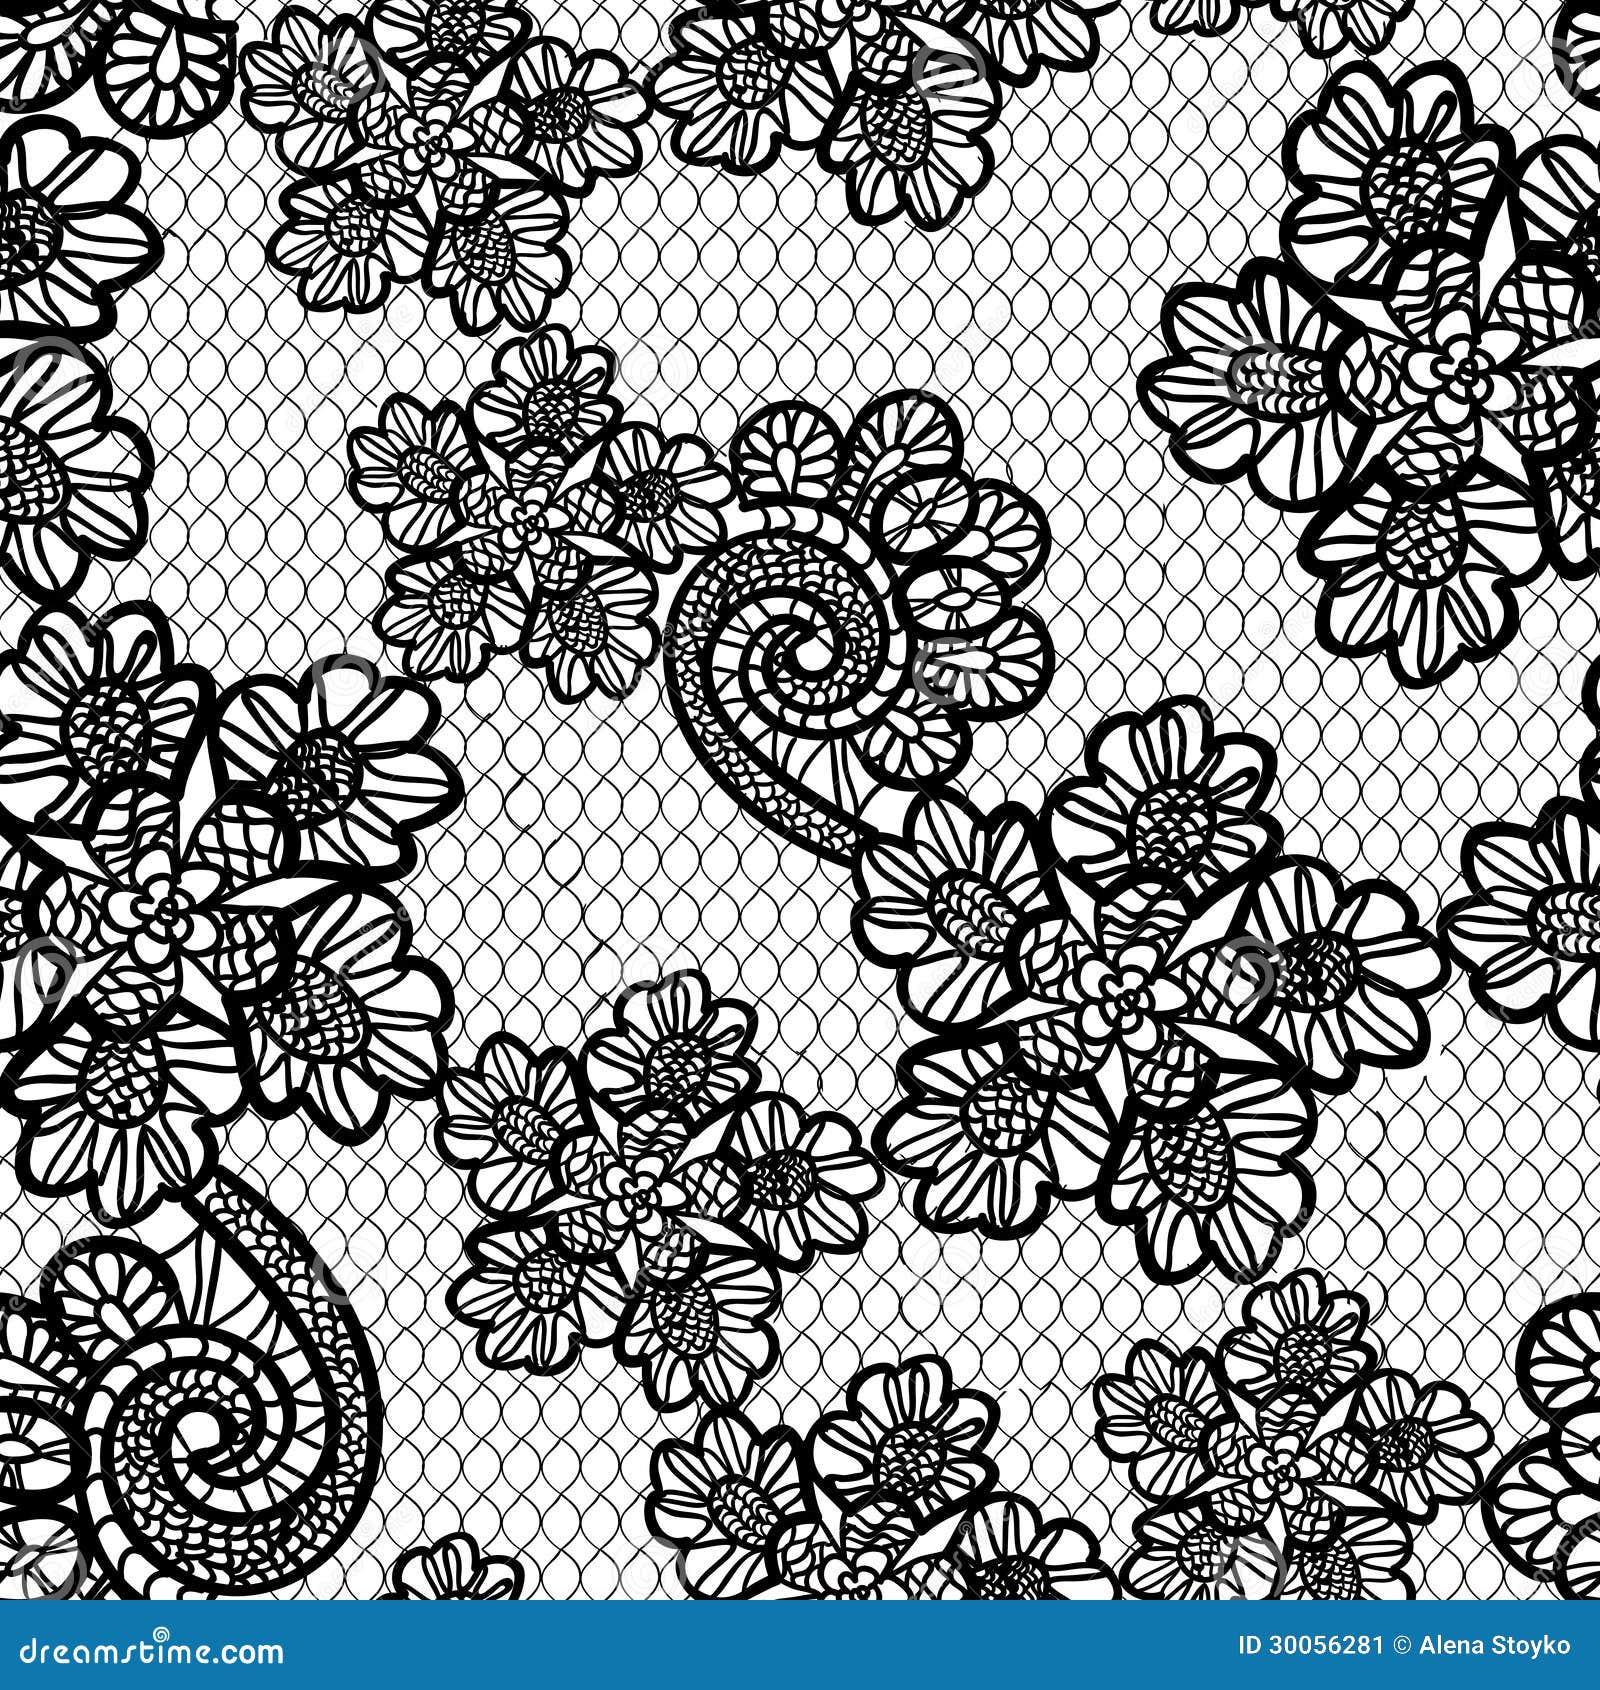 https://thumbs.dreamstime.com/z/seamless-black-lace-background-file-eps-format-30056281.jpg